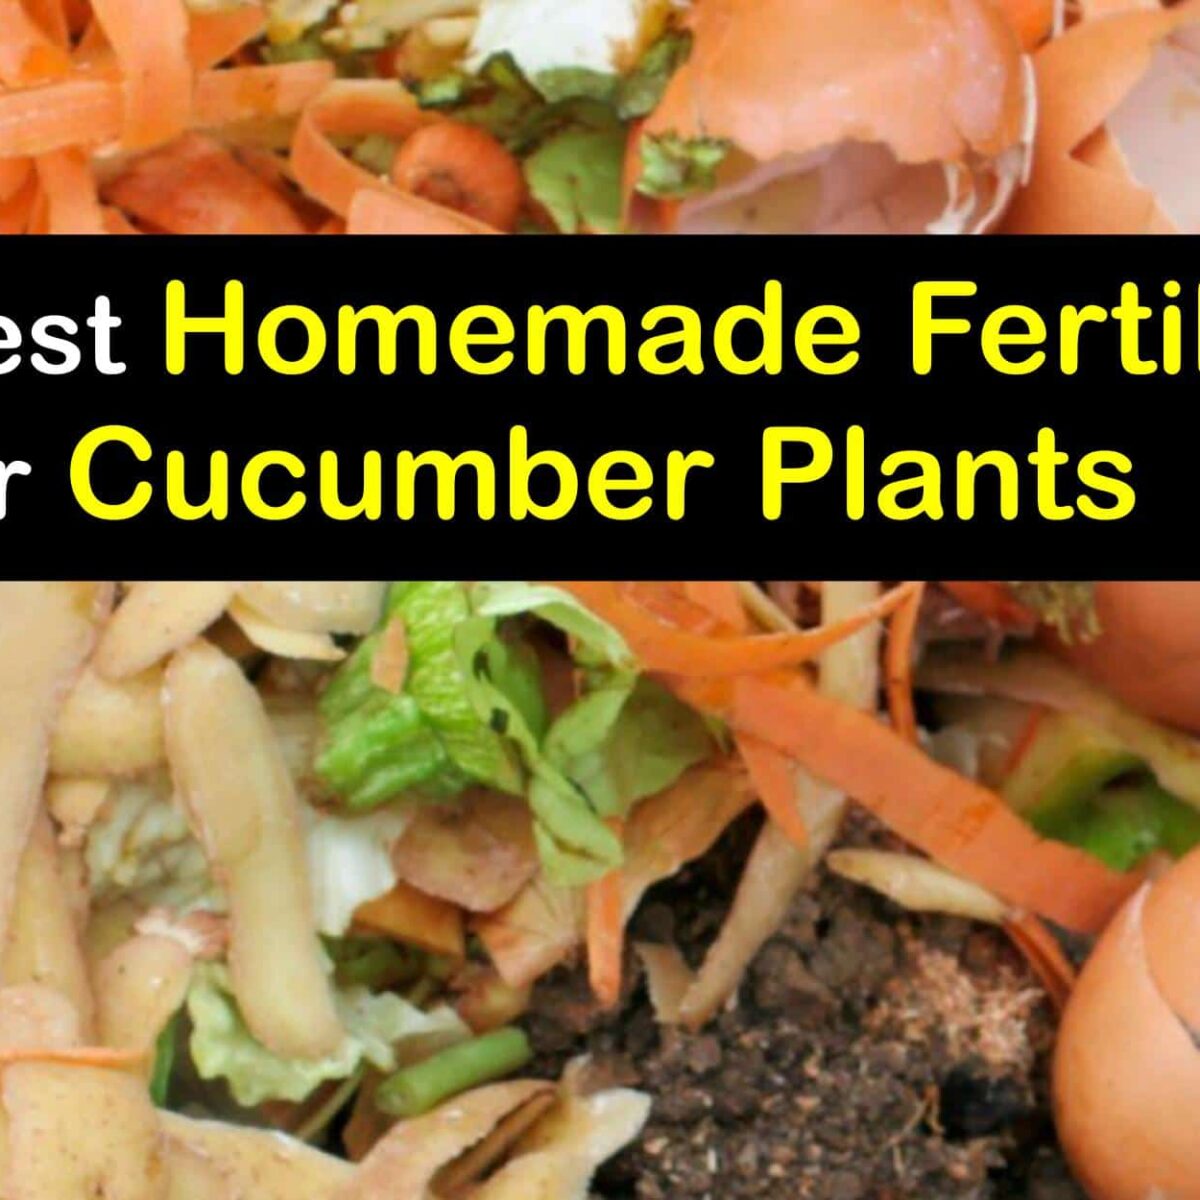 Image of Yard waste fertilizer for cucumbers